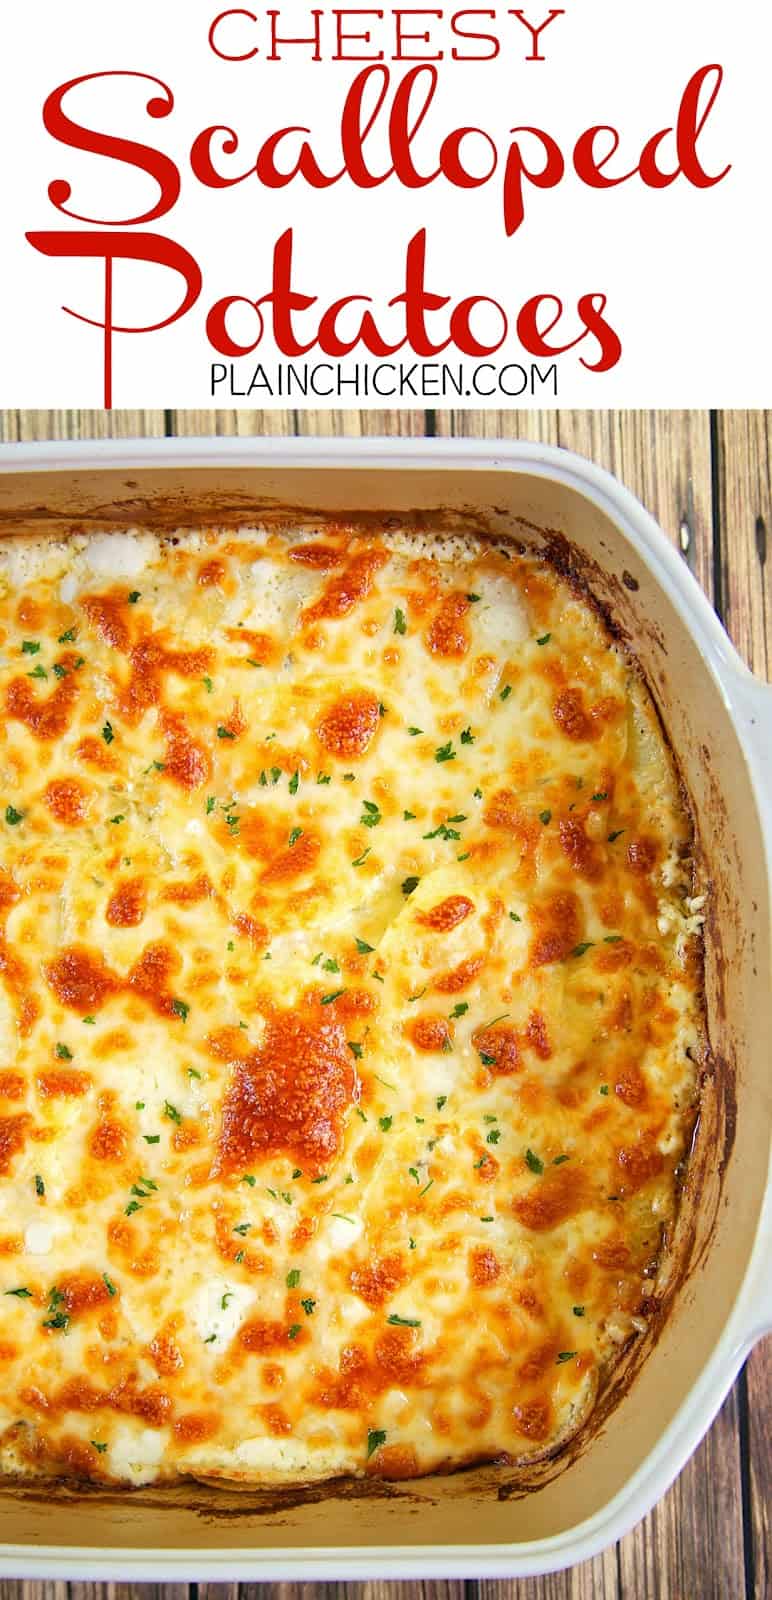 Cheesy Scalloped Potatoes - THE BEST potatoes EVER! Everything cooks in the same pan - easy cleanup! Only 5 ingredients! Potatoes, heavy cream, garlic, parsley, and mozzarella cheese. I could have a made a meal out of these potatoes. I'm still thinking about them! SO good! Easy side dish that is ready in 30 minutes.